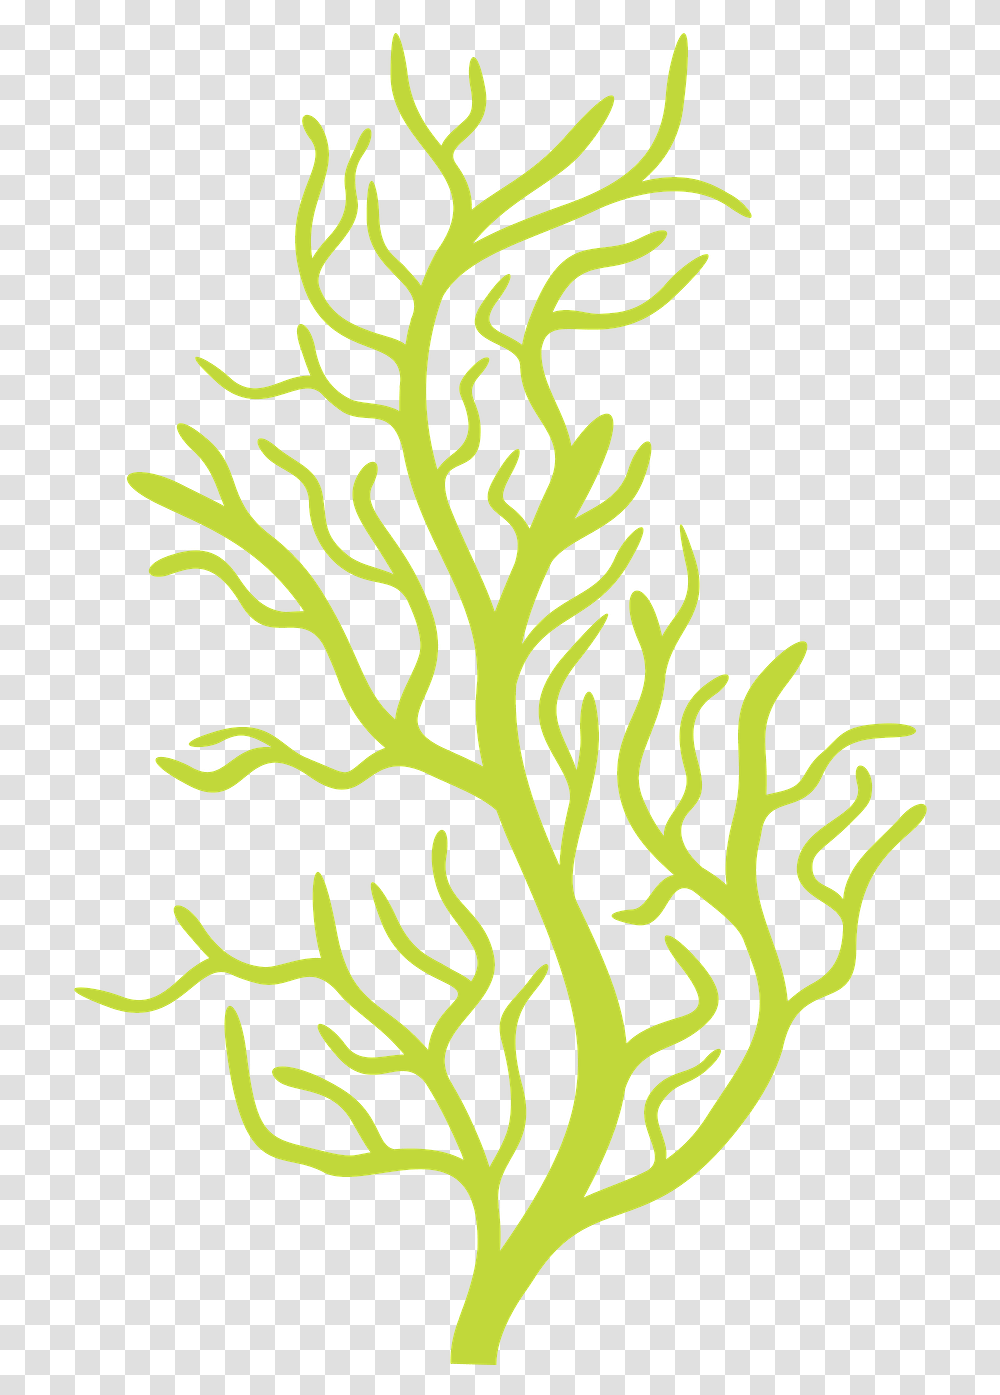 Vector Download Http Fazendoarte Minus Bubble Guppies Seaweed, Pattern, Nature, Outdoors Transparent Png